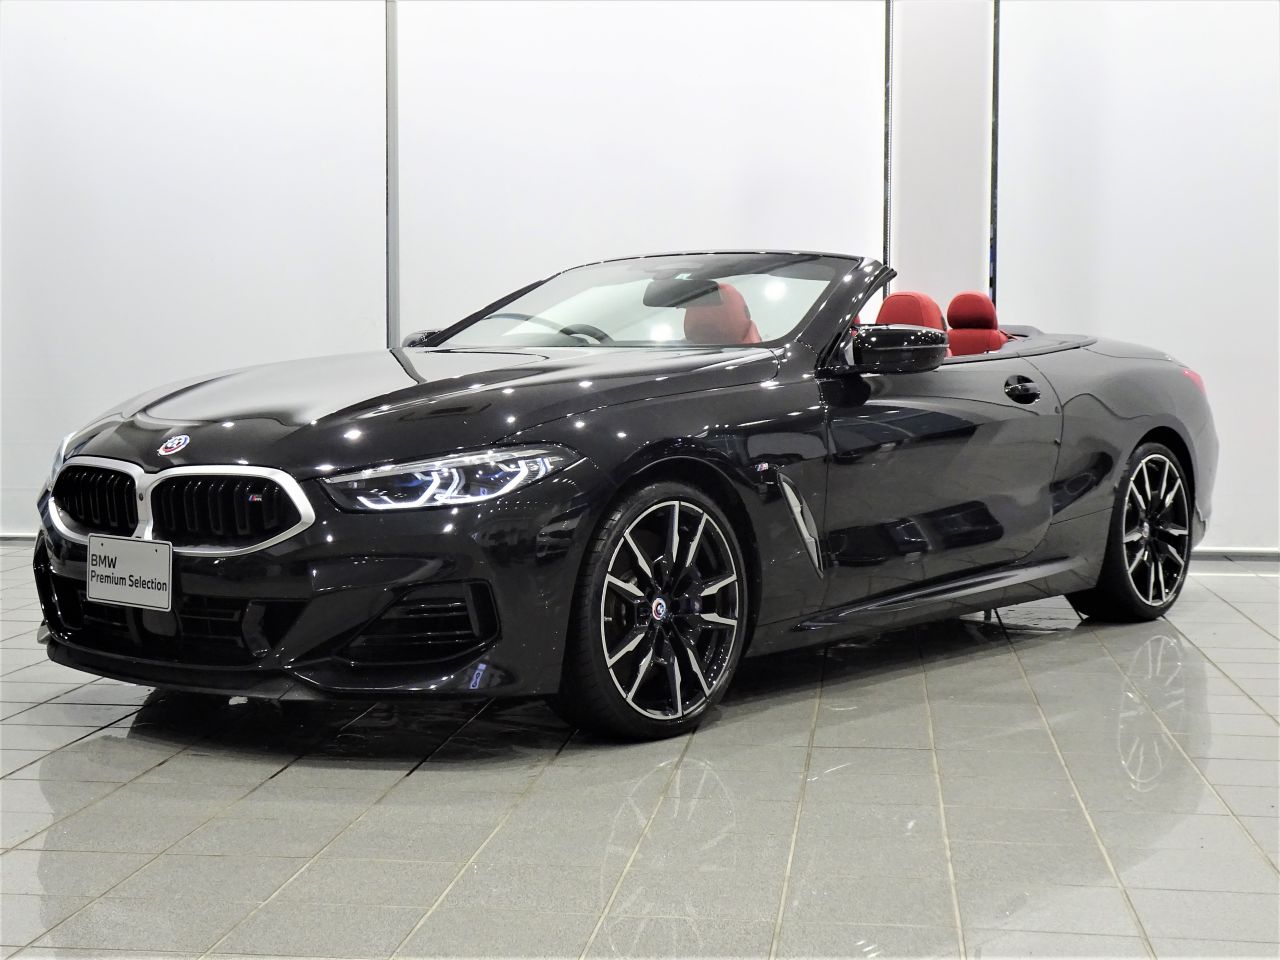 M850i xDrive Cabriolet